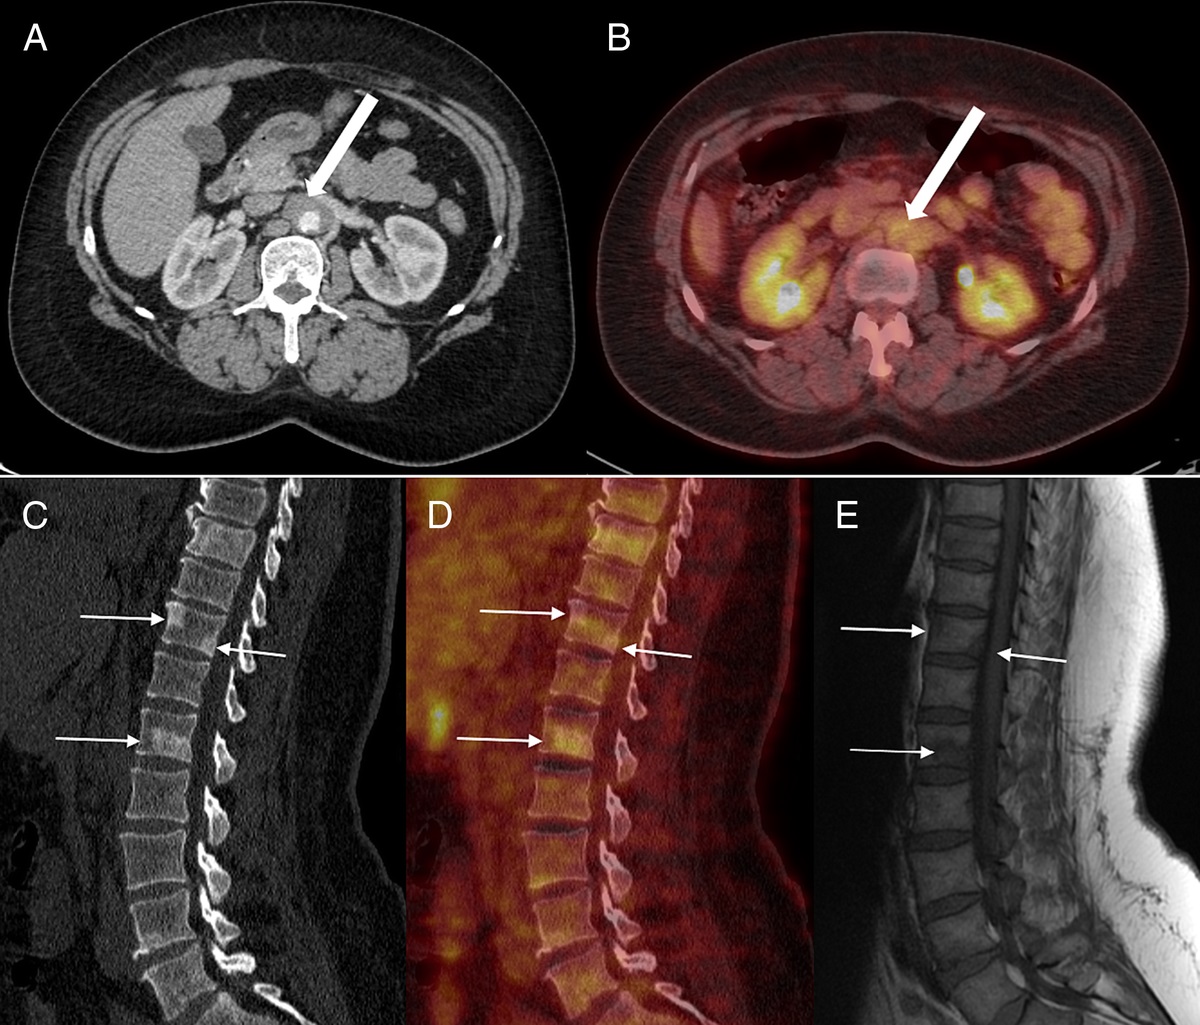 Typical Bone Scintigraphy Presentation of Erdheim-Chester Disease in a Patient Diagnosed With IgG4-Related Disease